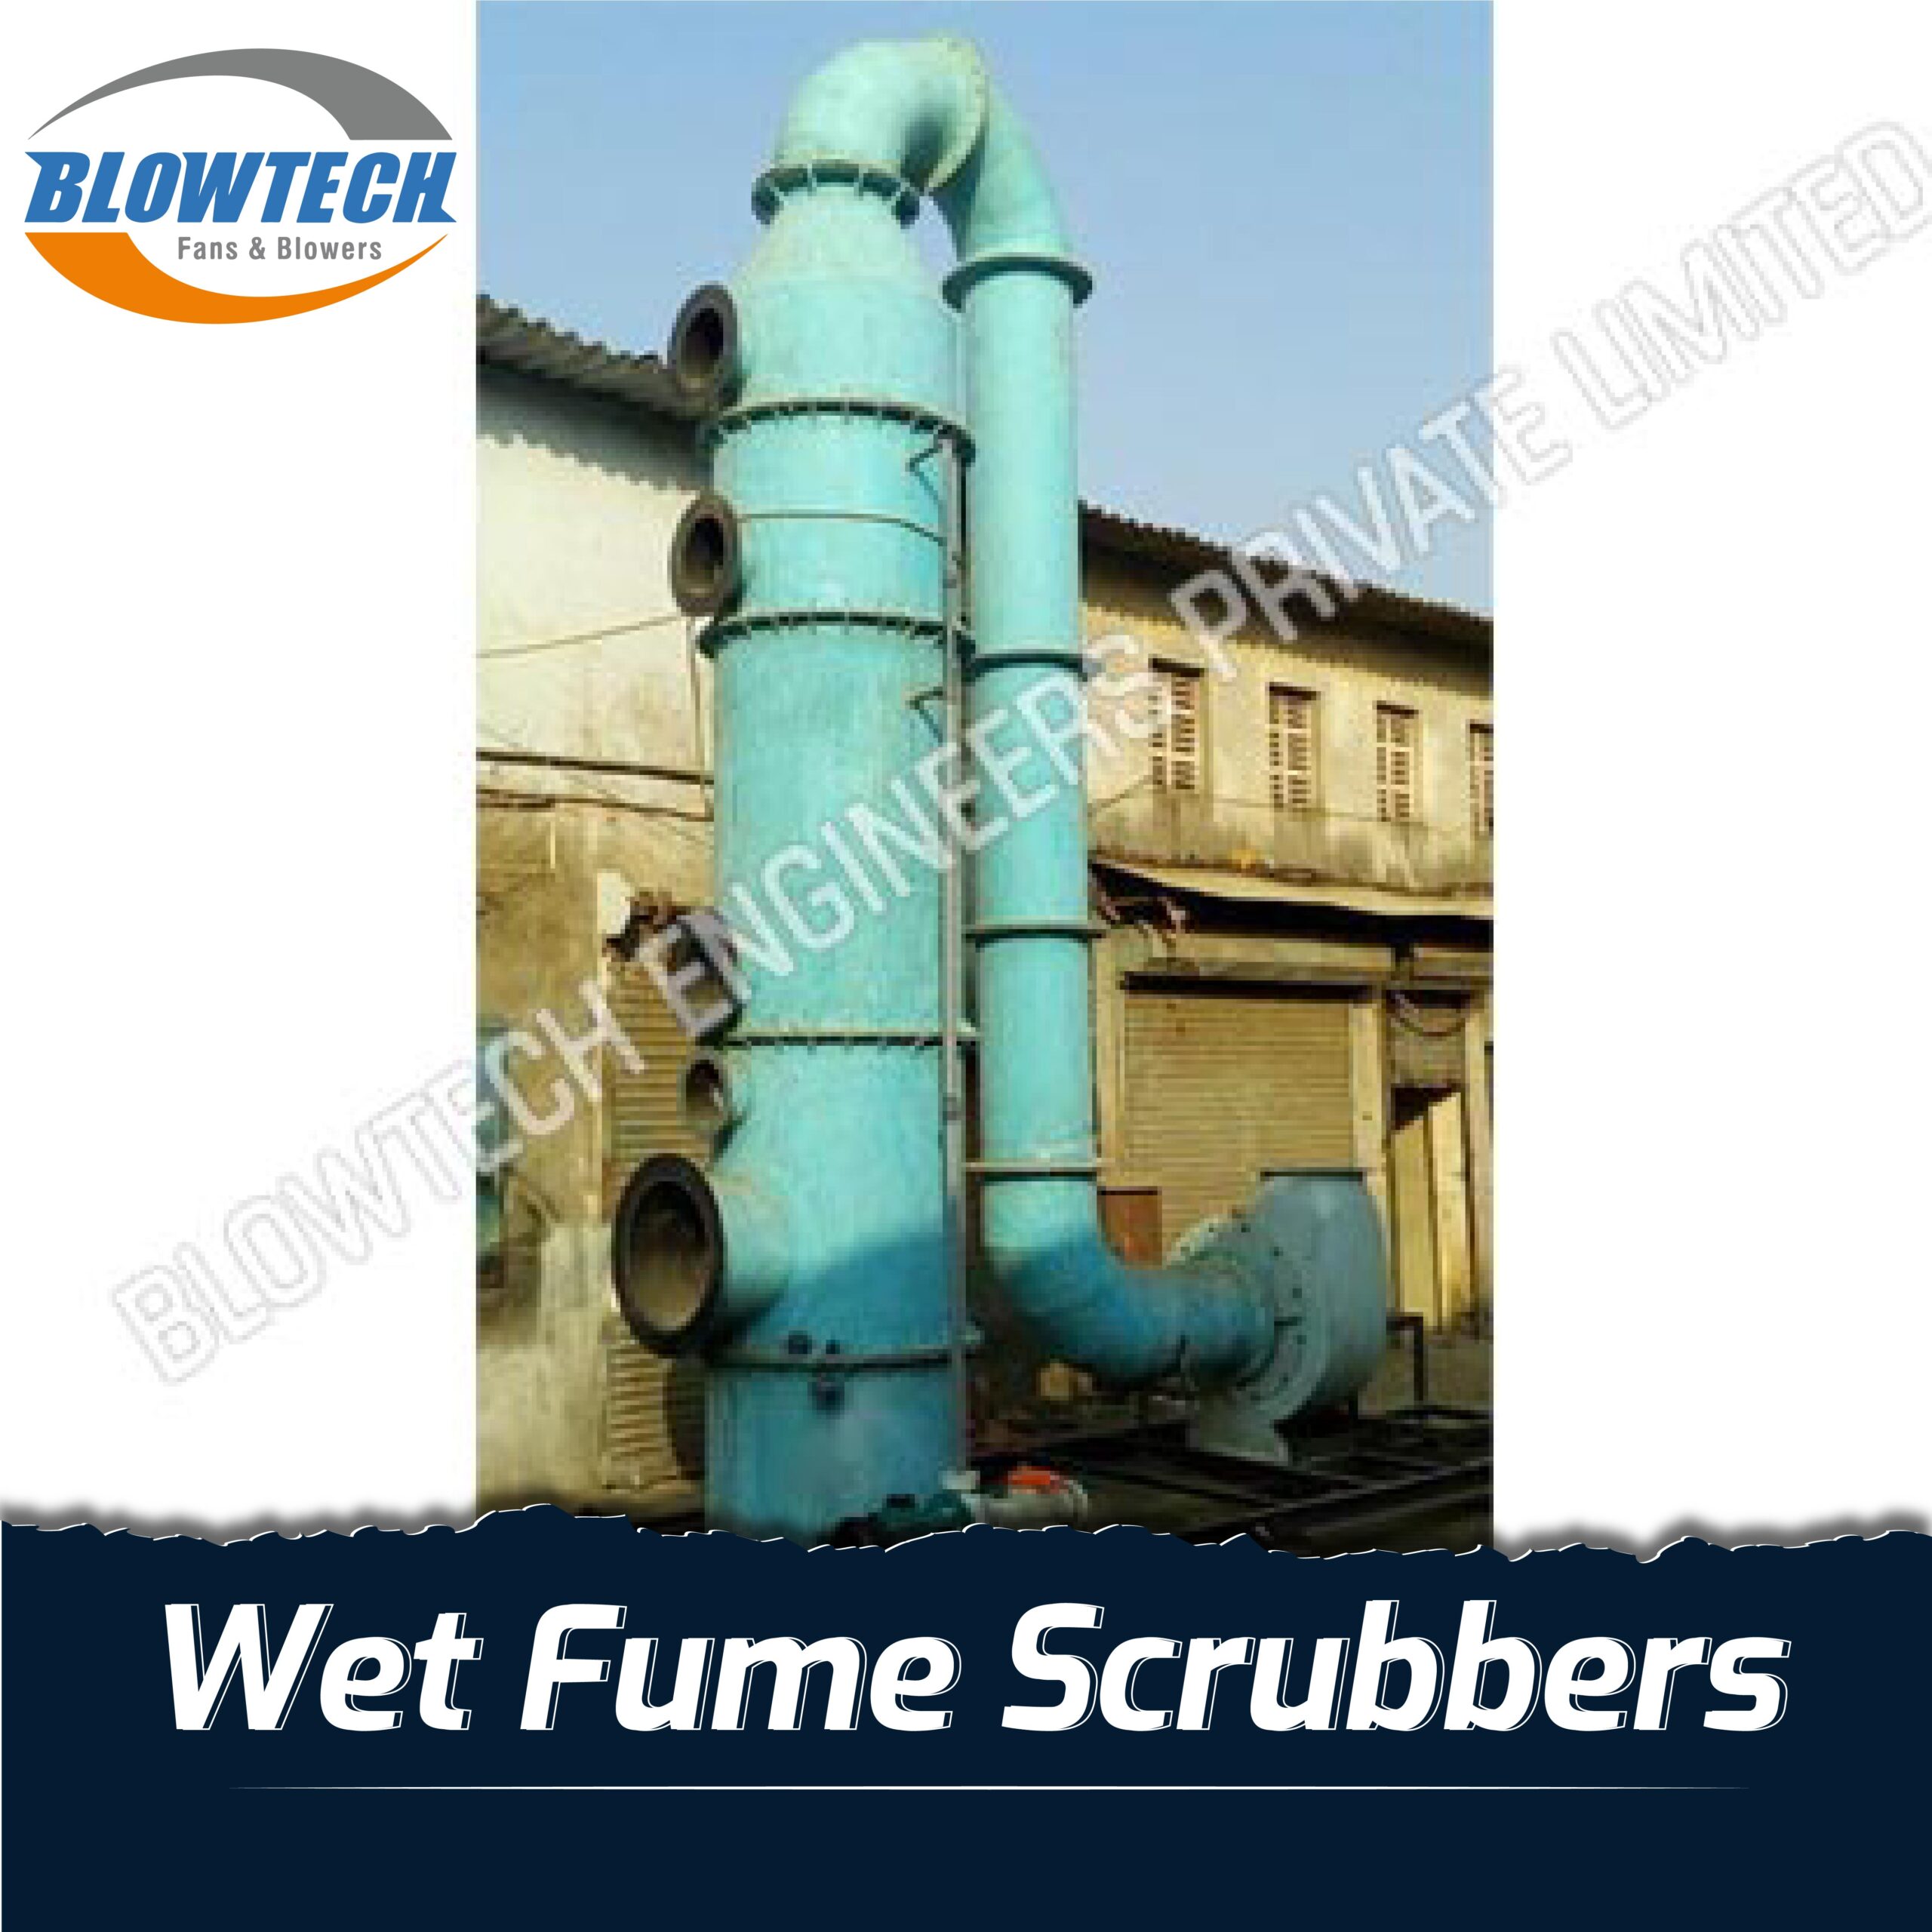 Wet Fume Scrubbers  manufacturer, supplier and exporter in Mumbai, India